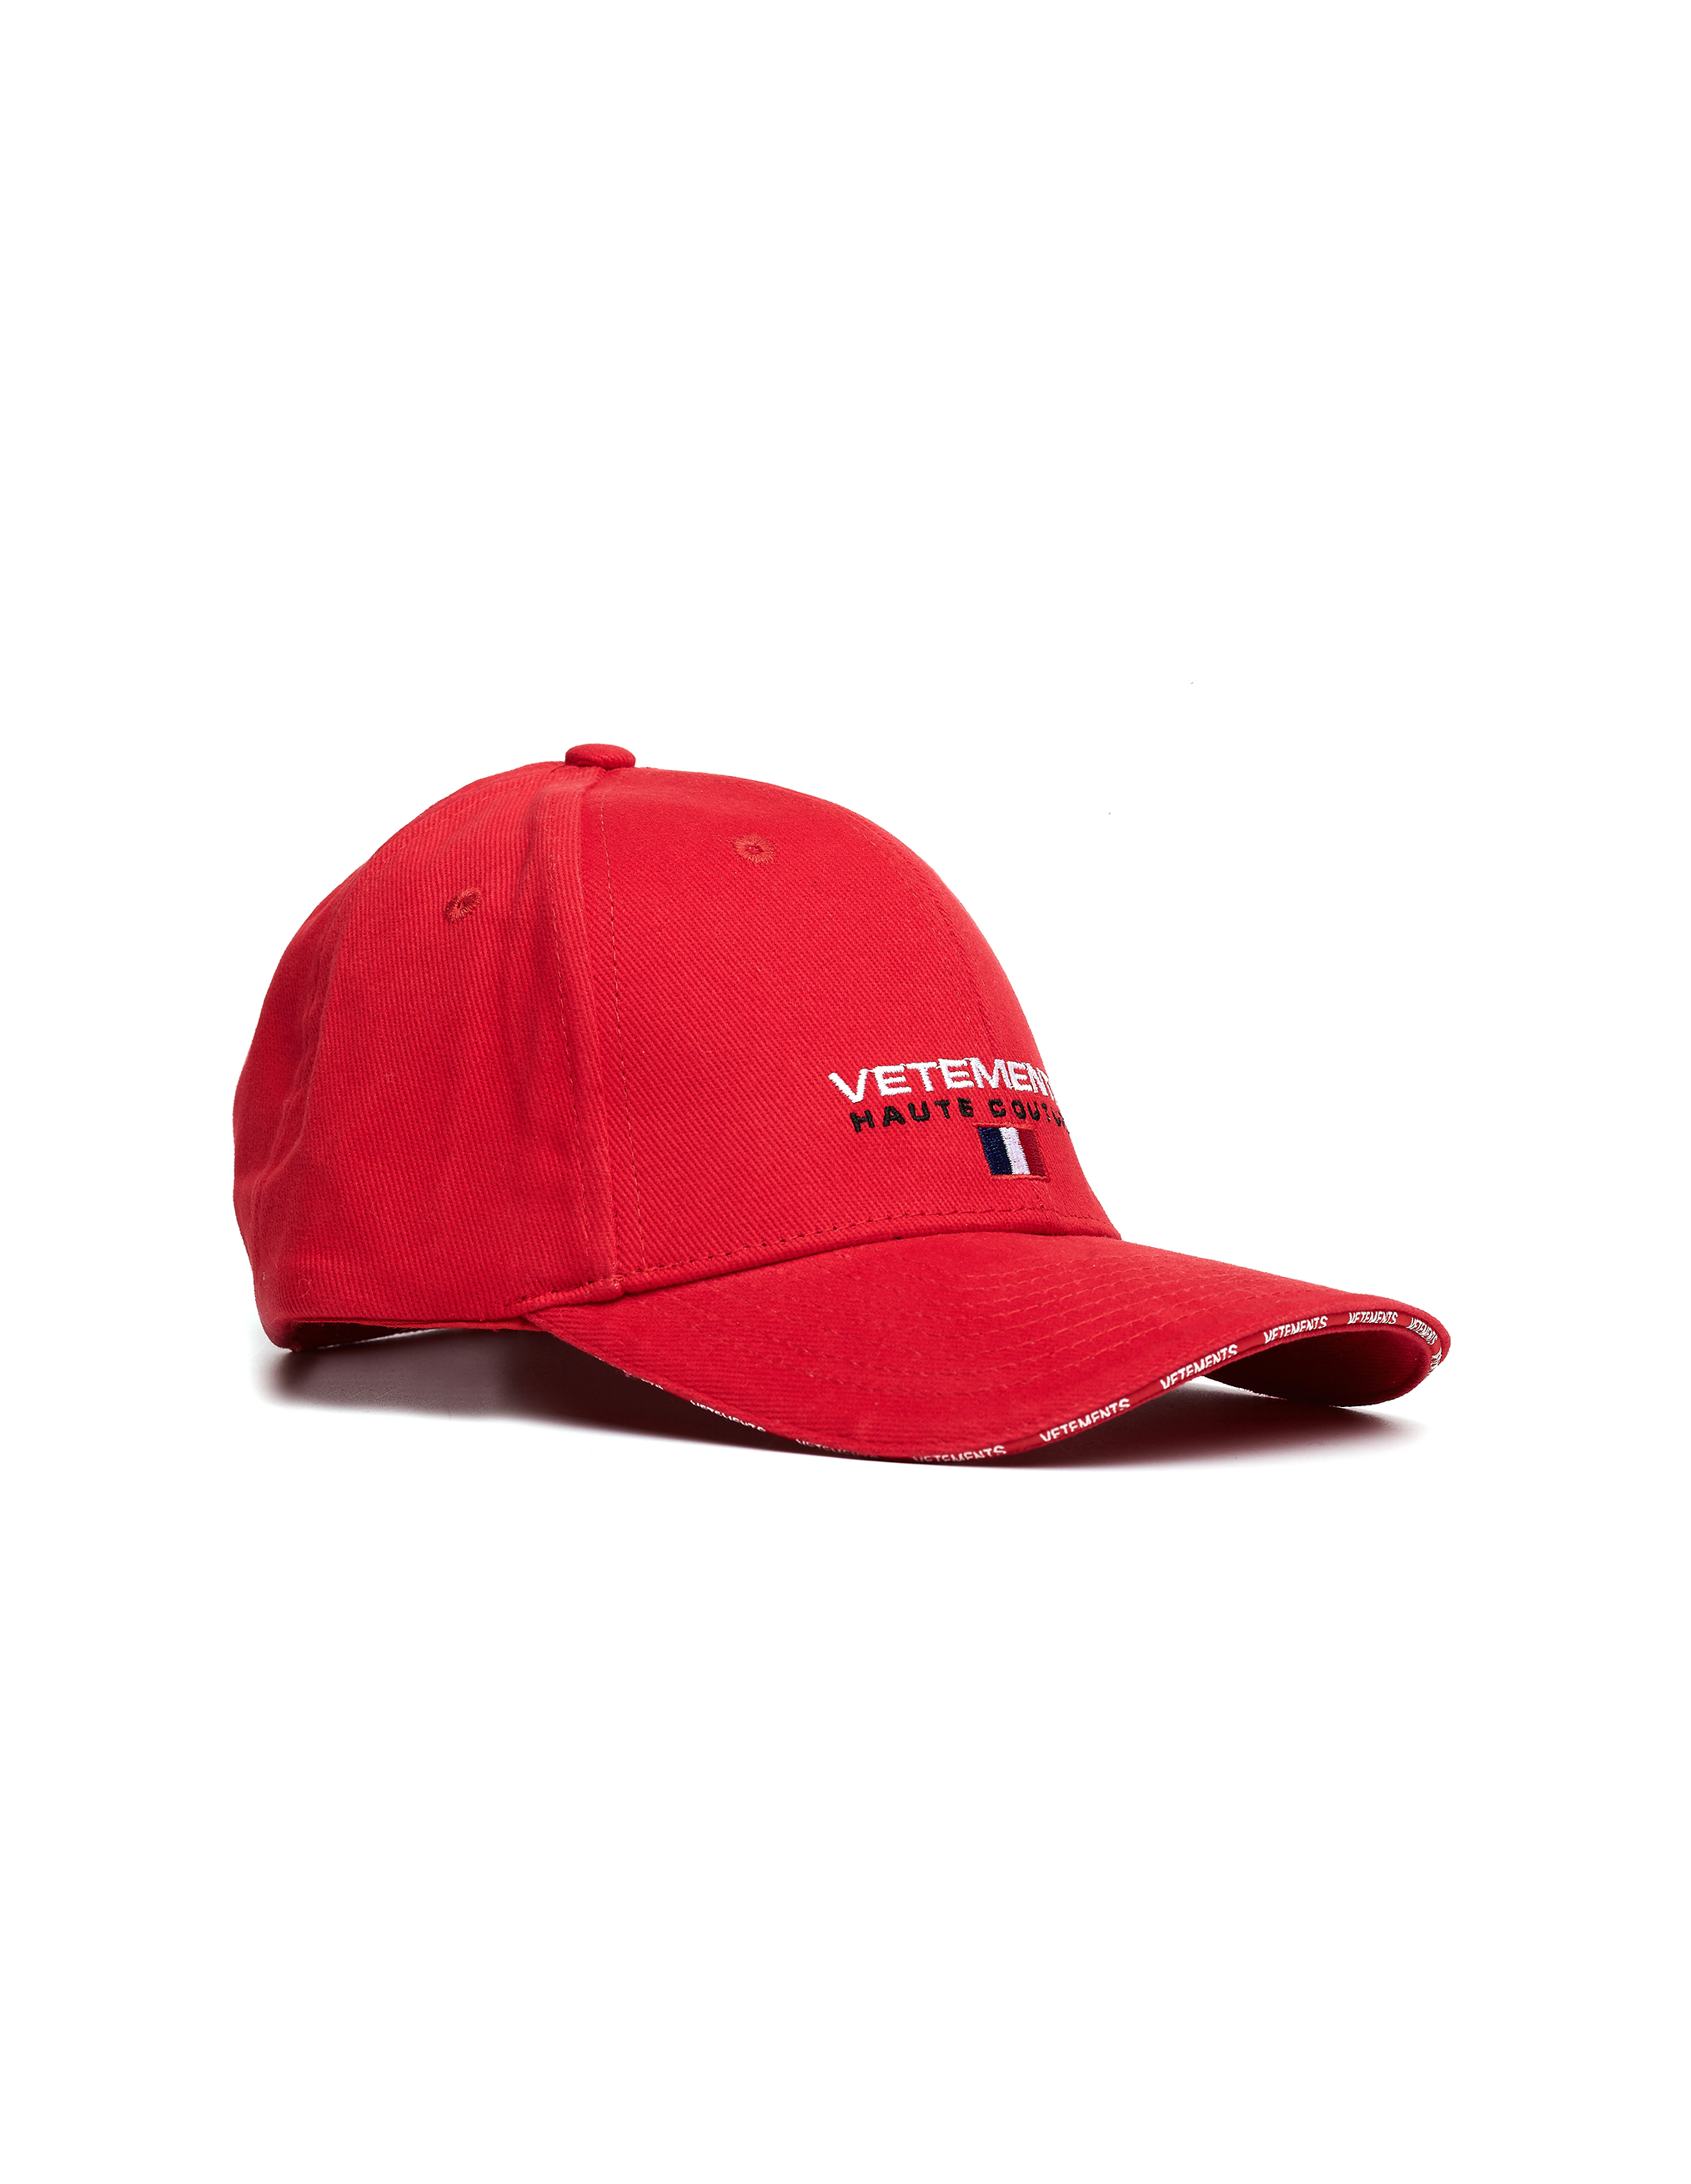 VETEMENTS Red Haute Couture Embroidered Cap,WSS18AC16/red